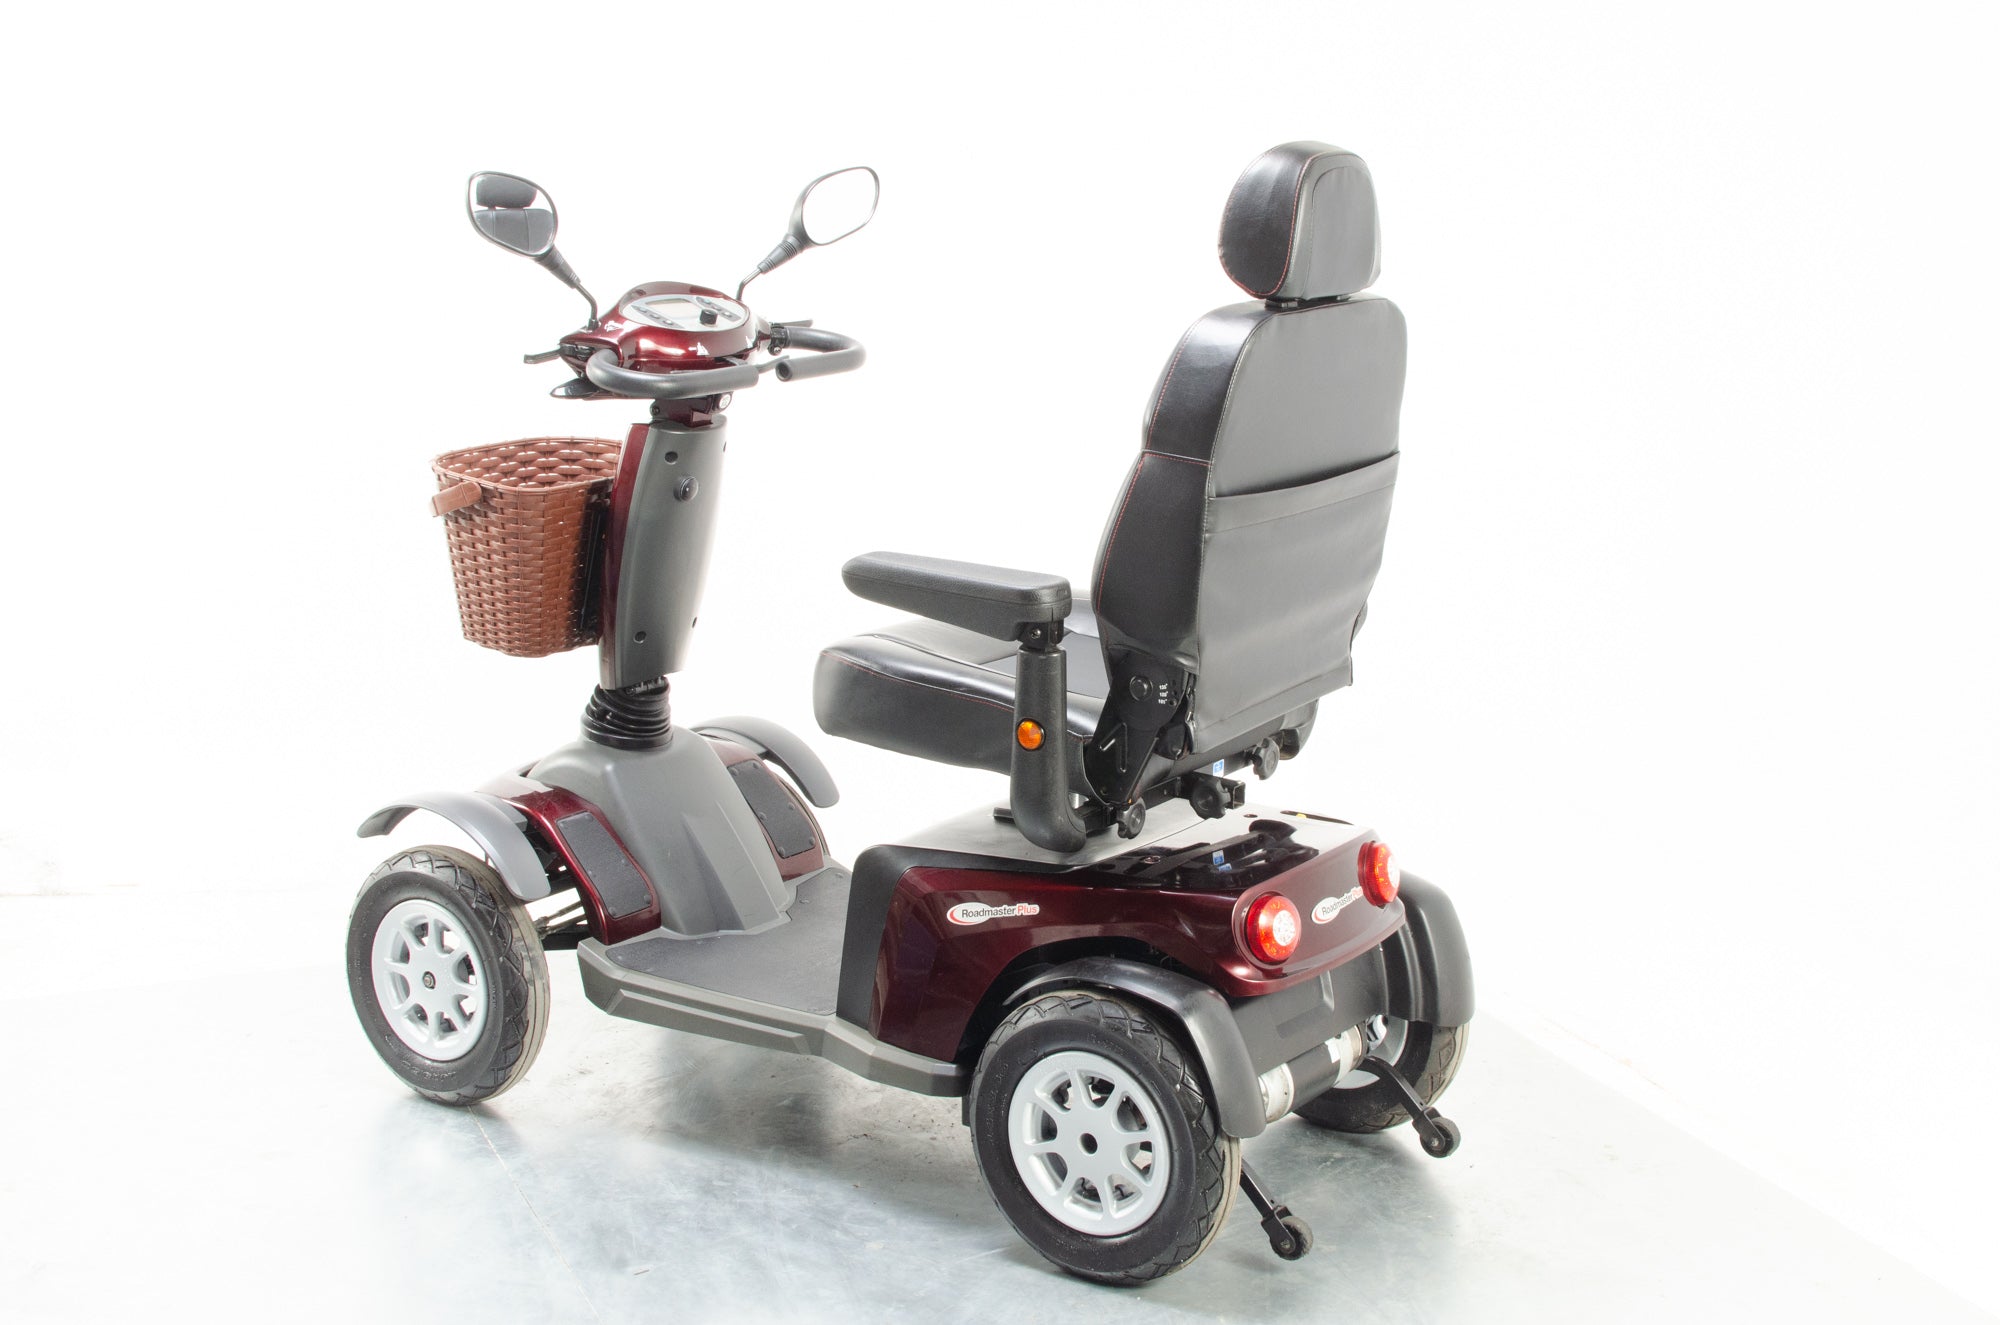 Eden Roadmaster Plus Used Electric Mobility Scooter 8mph Large All-Terrain Luxury